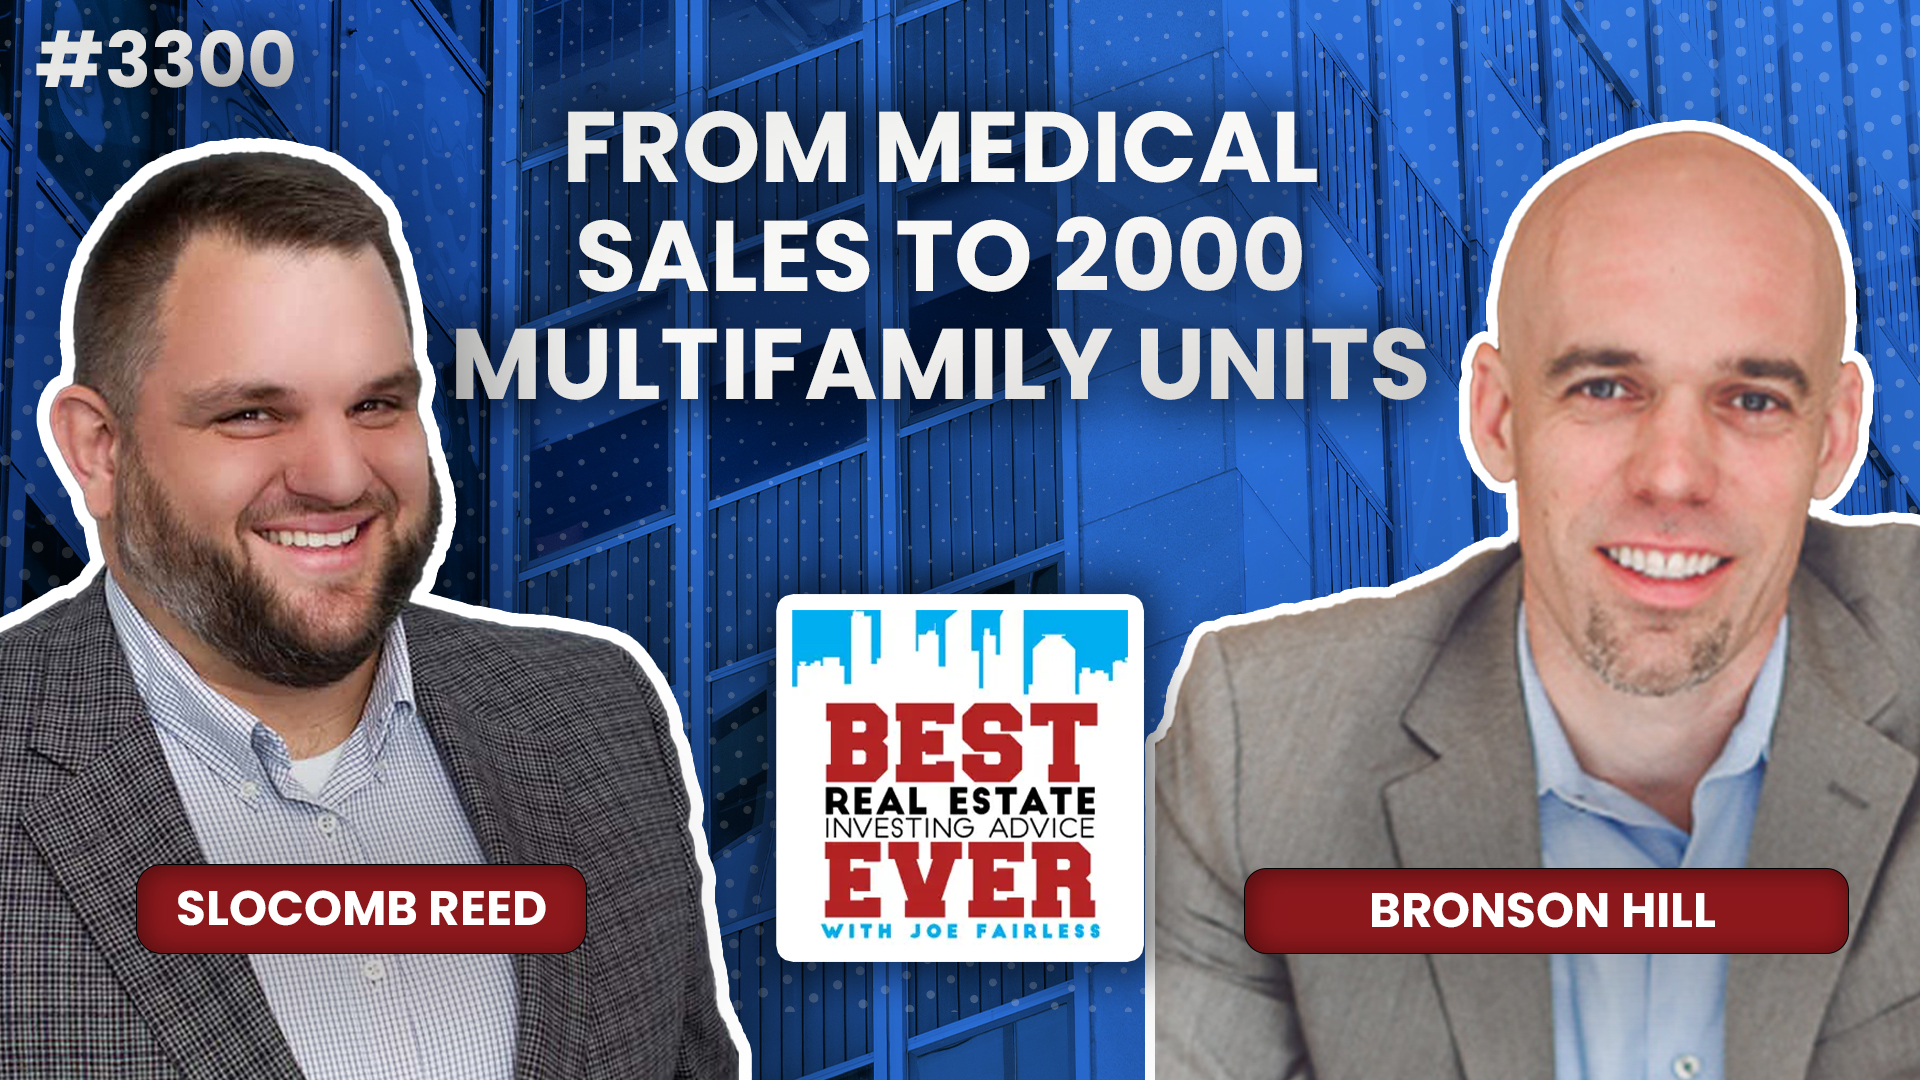 JF3300: Bronson Hill - From Medical Sales to 2000 Multifamily Units